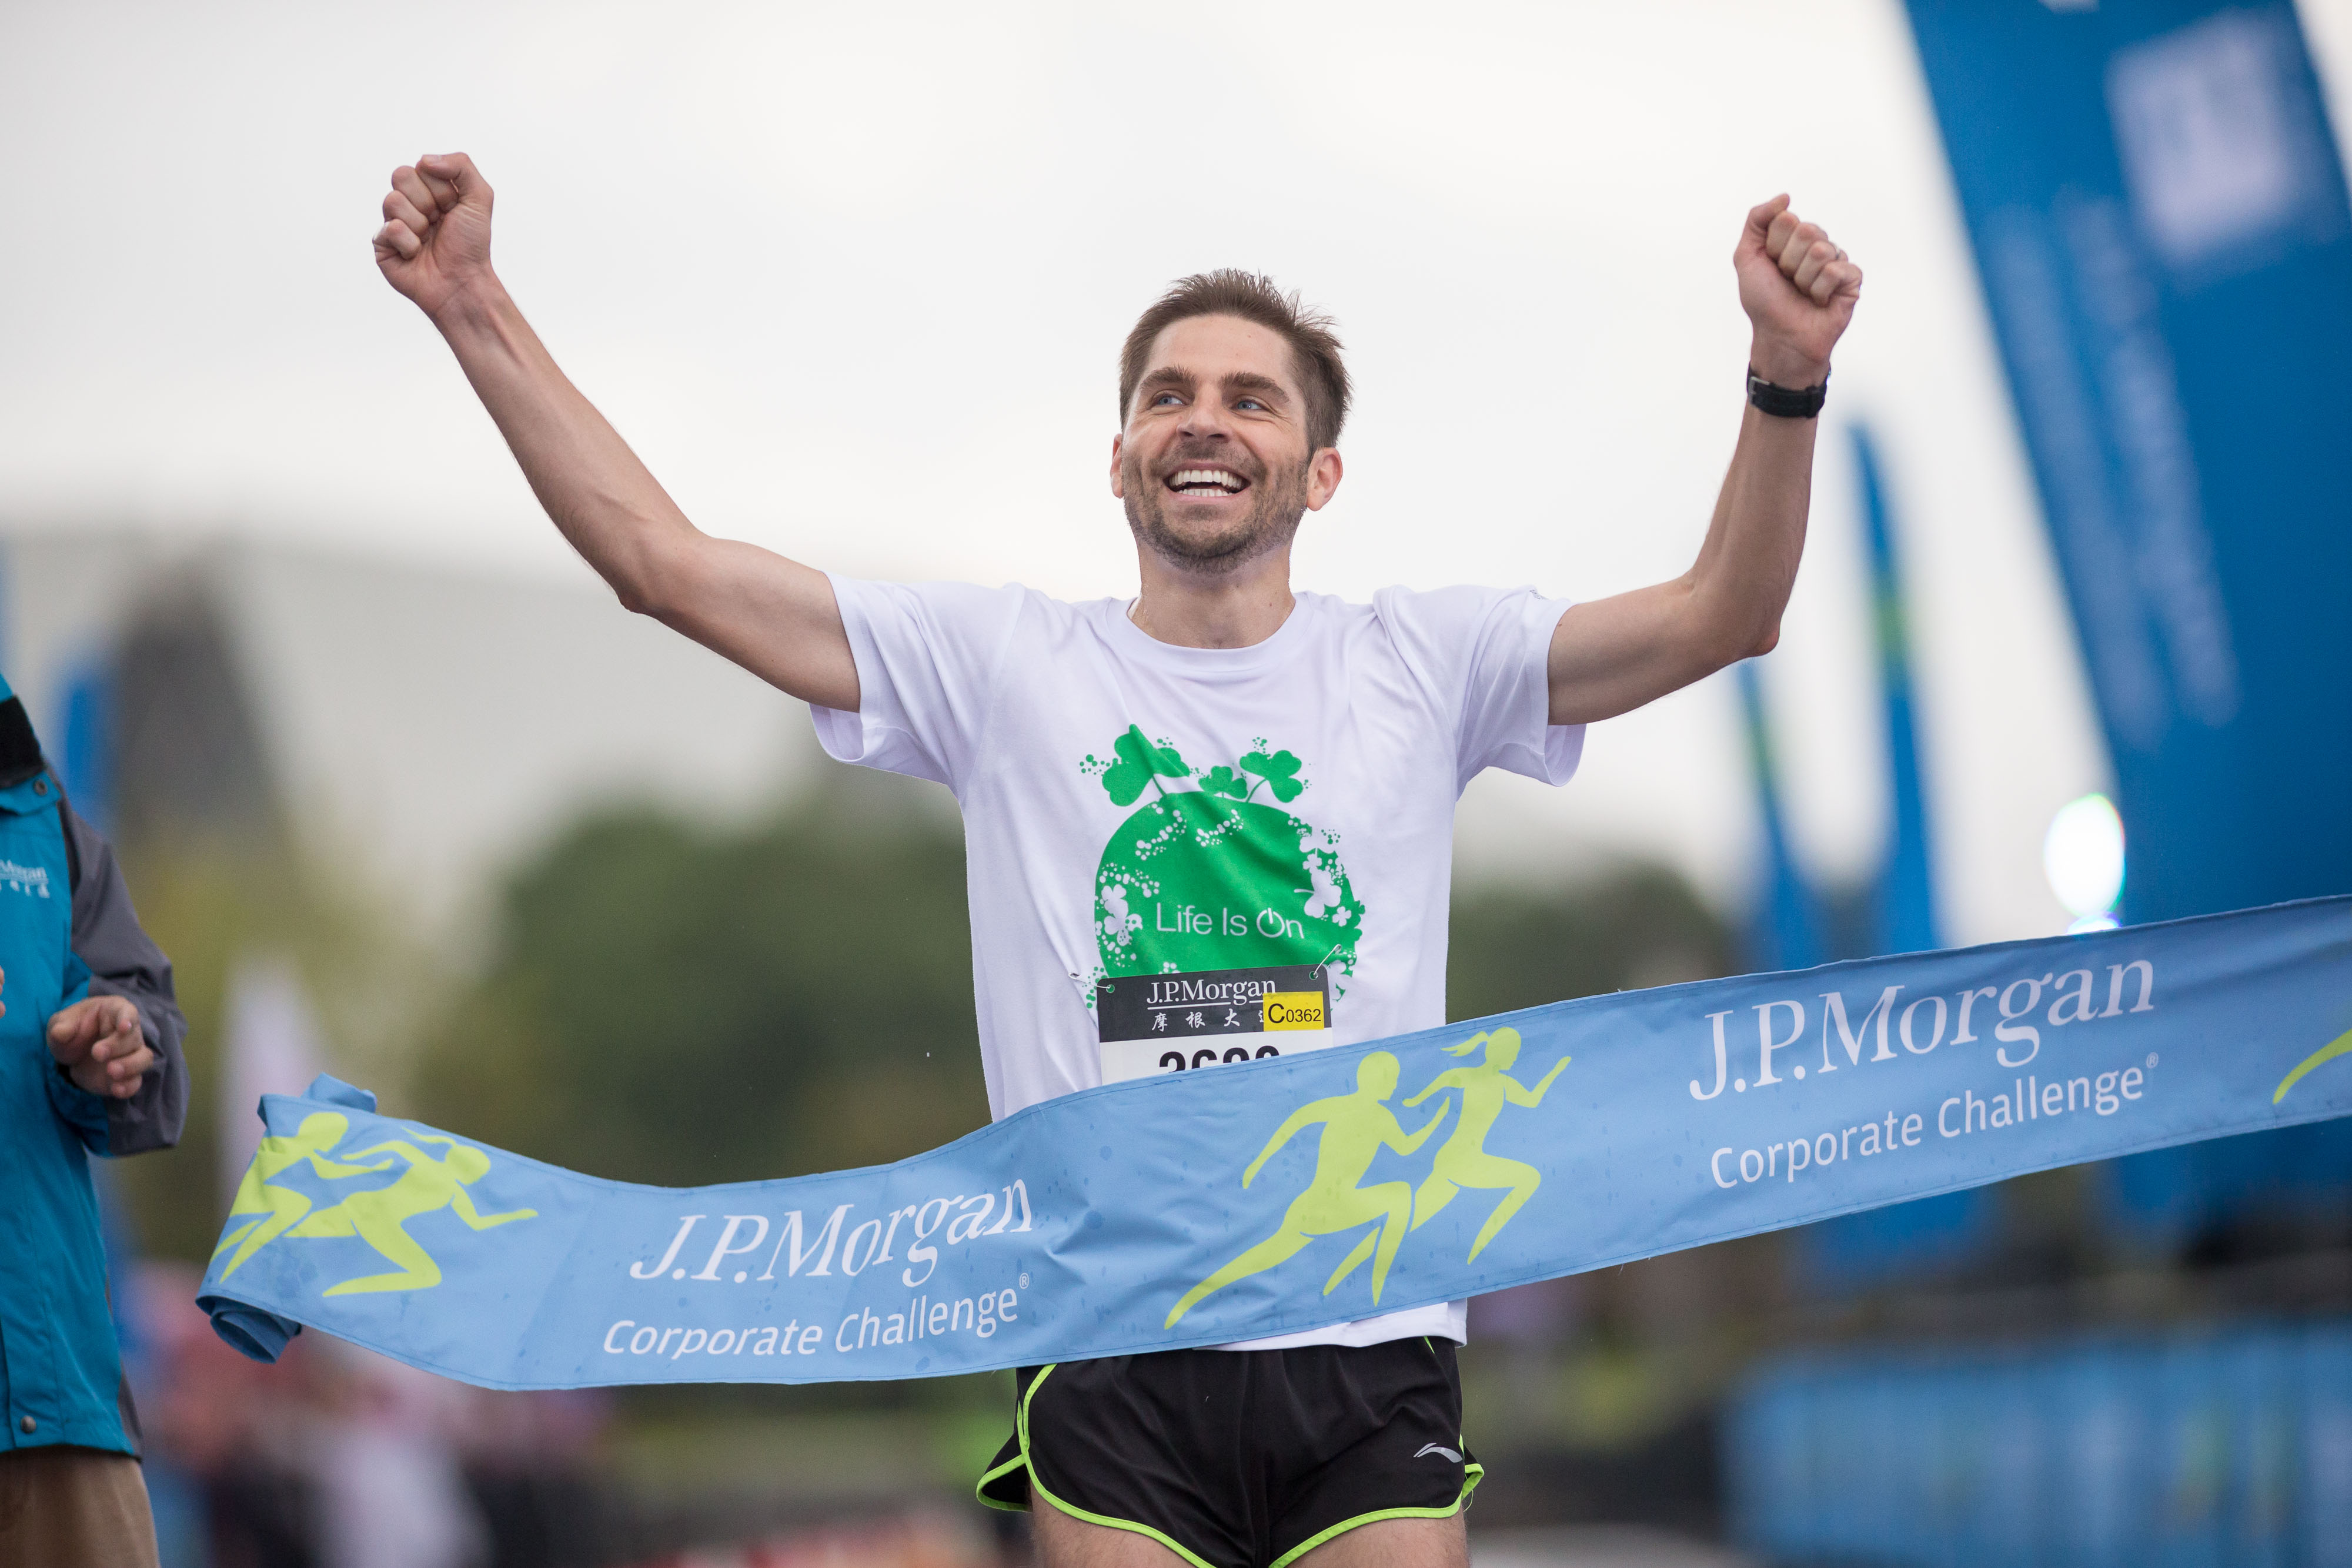 Mathieu Leboulanger crossed the finish line as male champion for the third consecutive year.